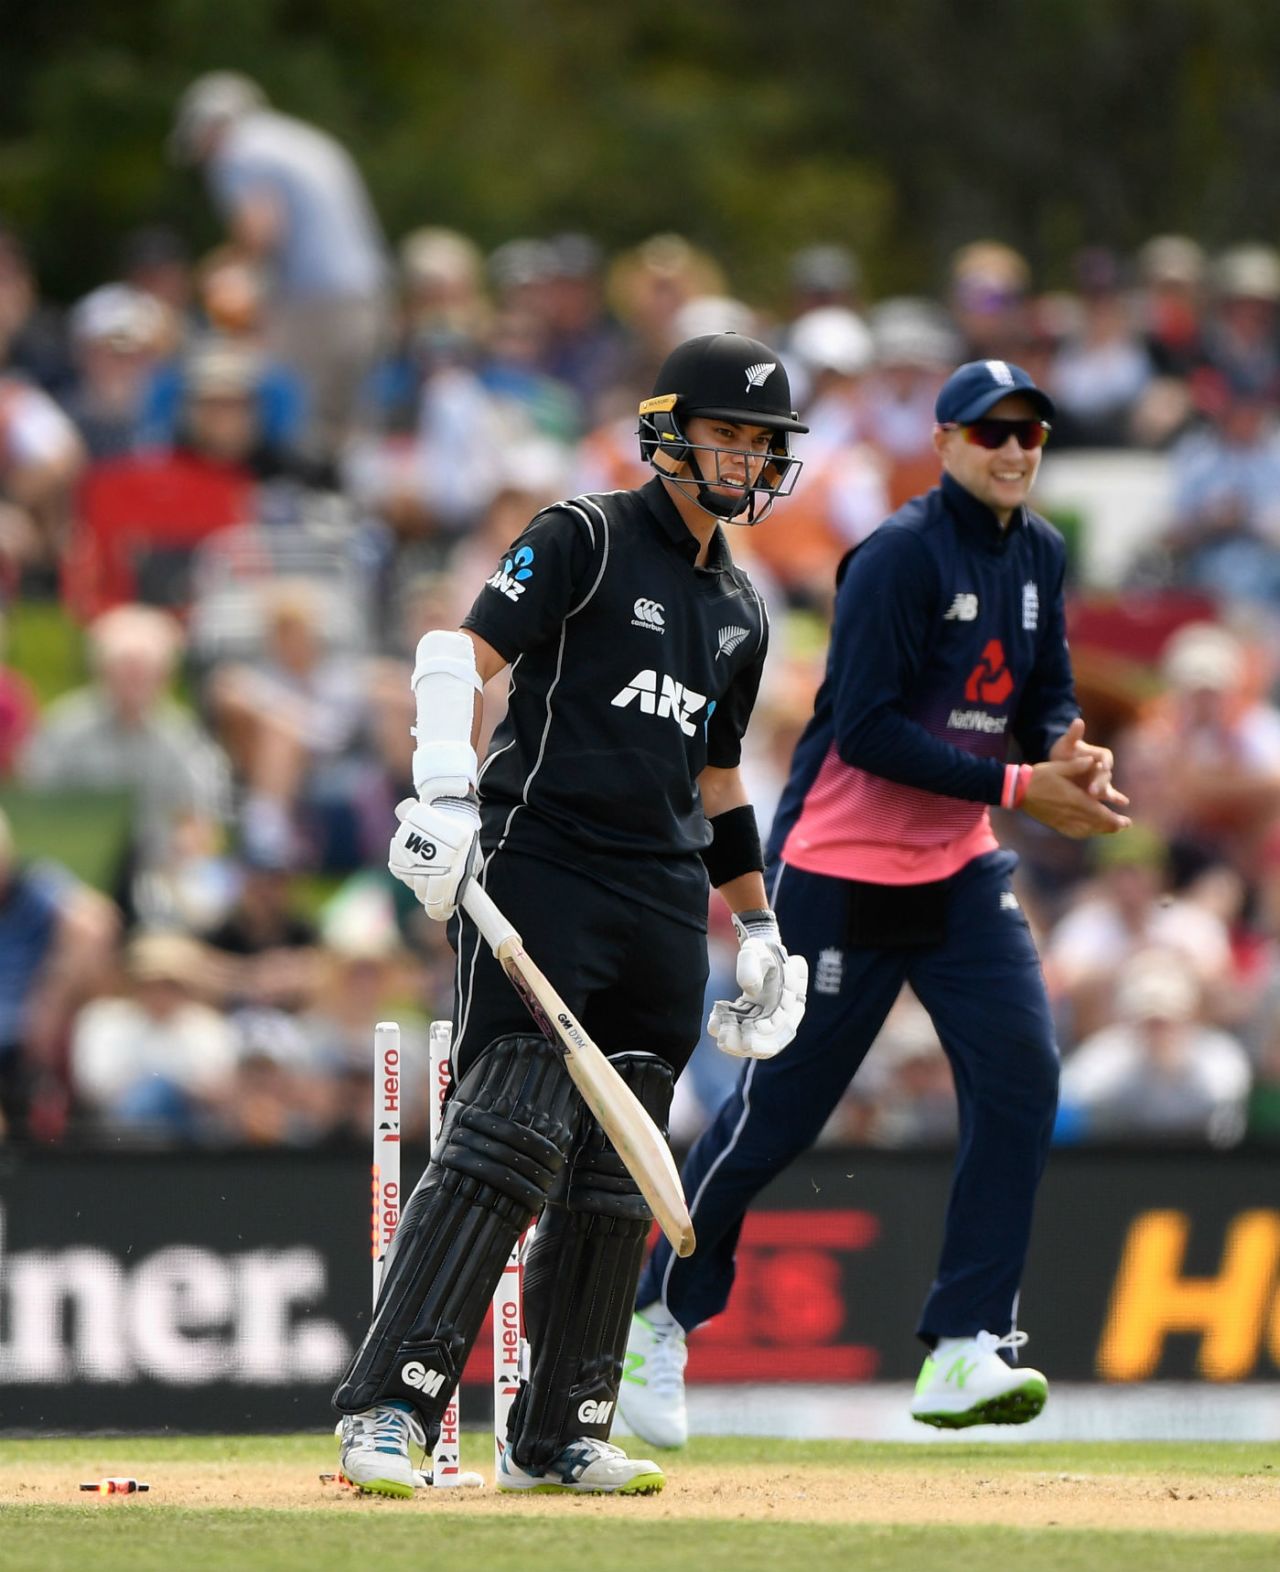 Mark Chapman was bowled for a duck by Moeen Ali, New Zealand v England, 5th ODI, Christchurch, March 10, 2018